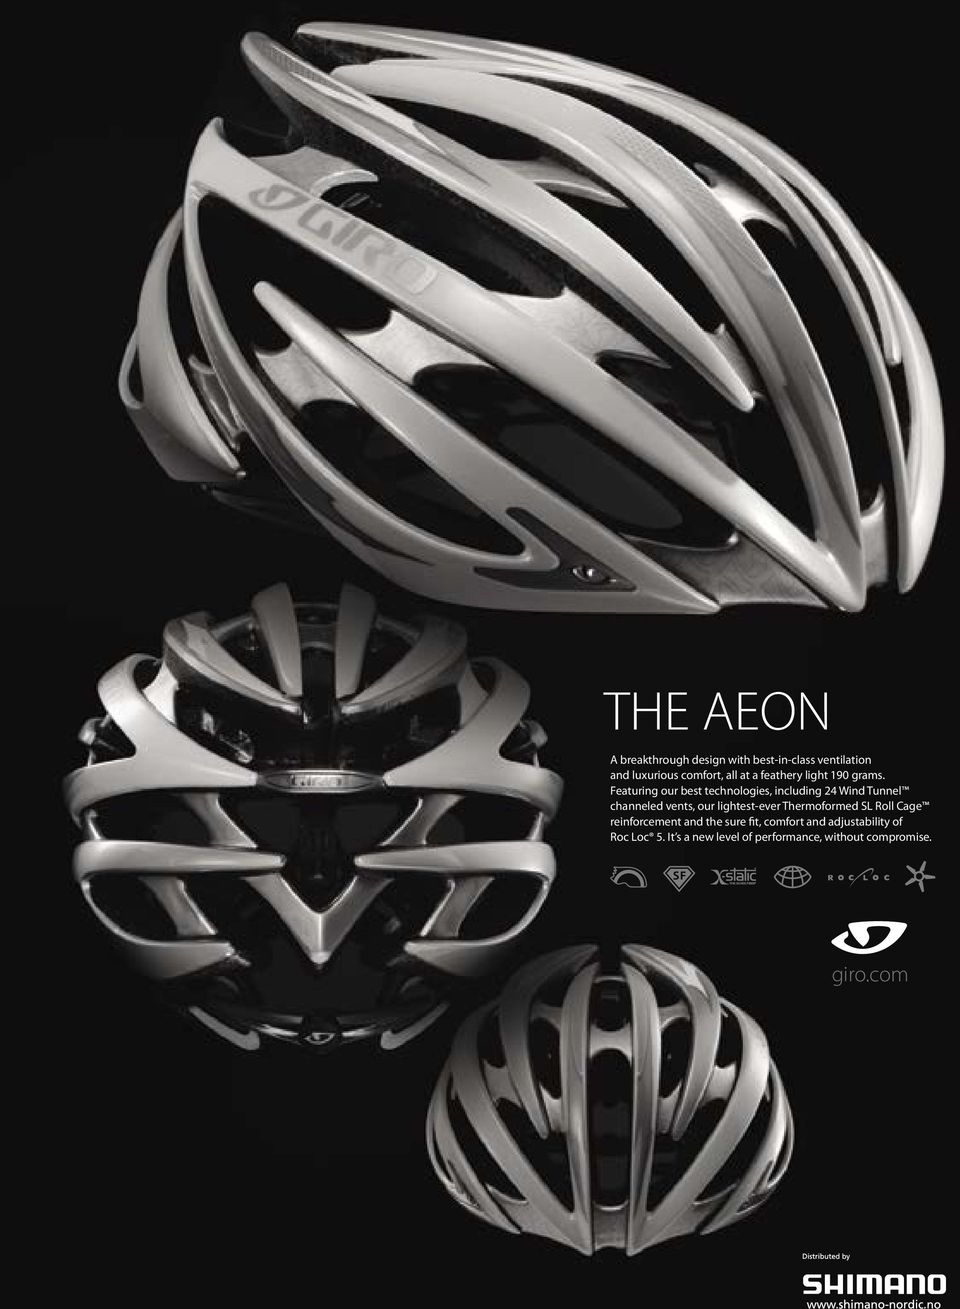 Featuring our best technolies, including 24 Wind Tunnel channeled vents, our lightest-ever